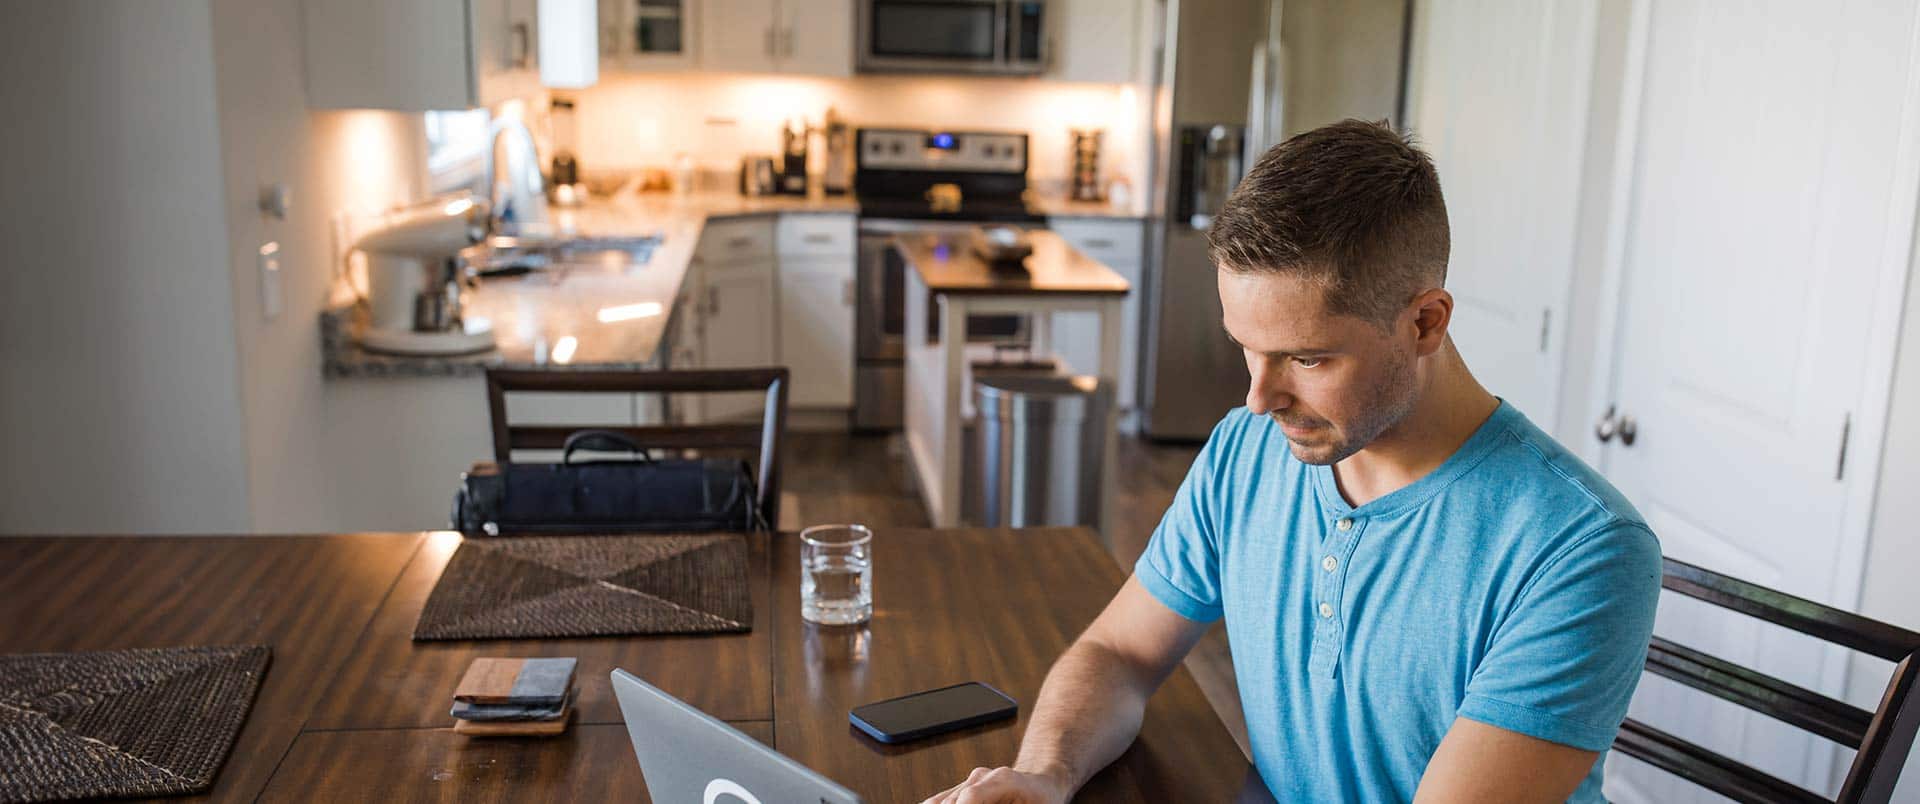 Blake Venable, who earned his degree from SNHU, wearing a blue shirt and sitting at a dining room table typing on a laptop